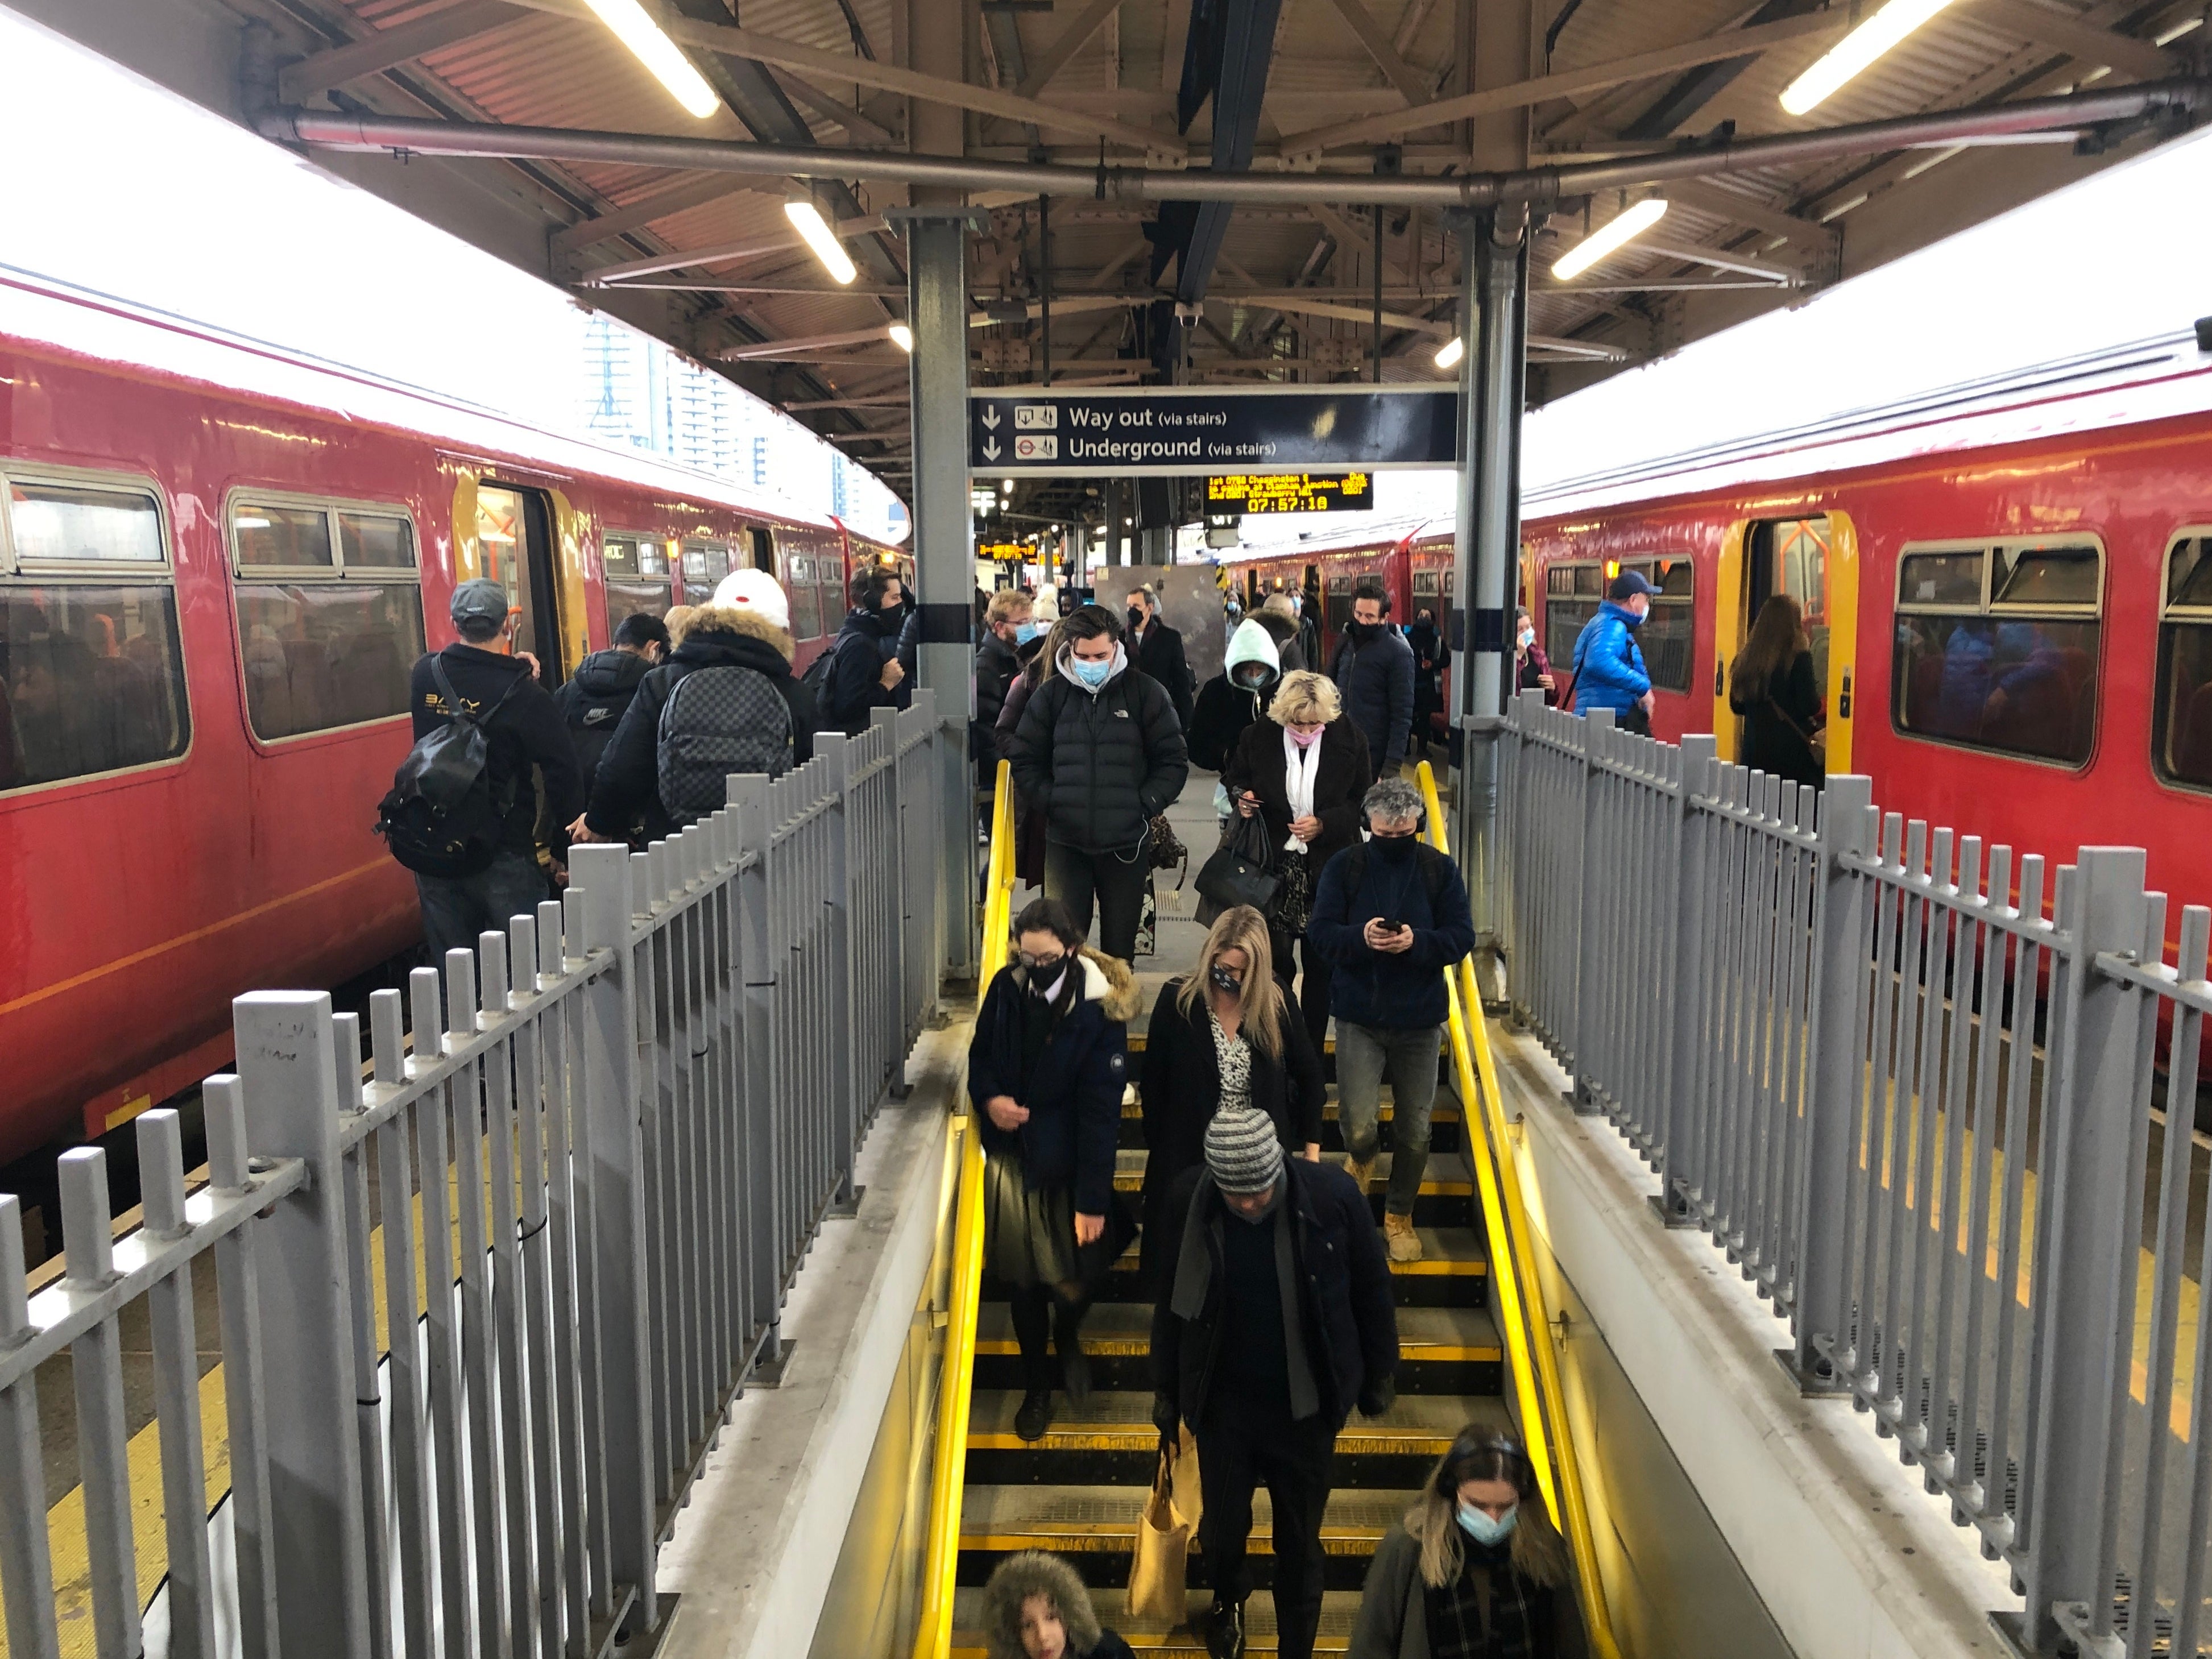 Vauxhall station in southwest London gears up for a busy day